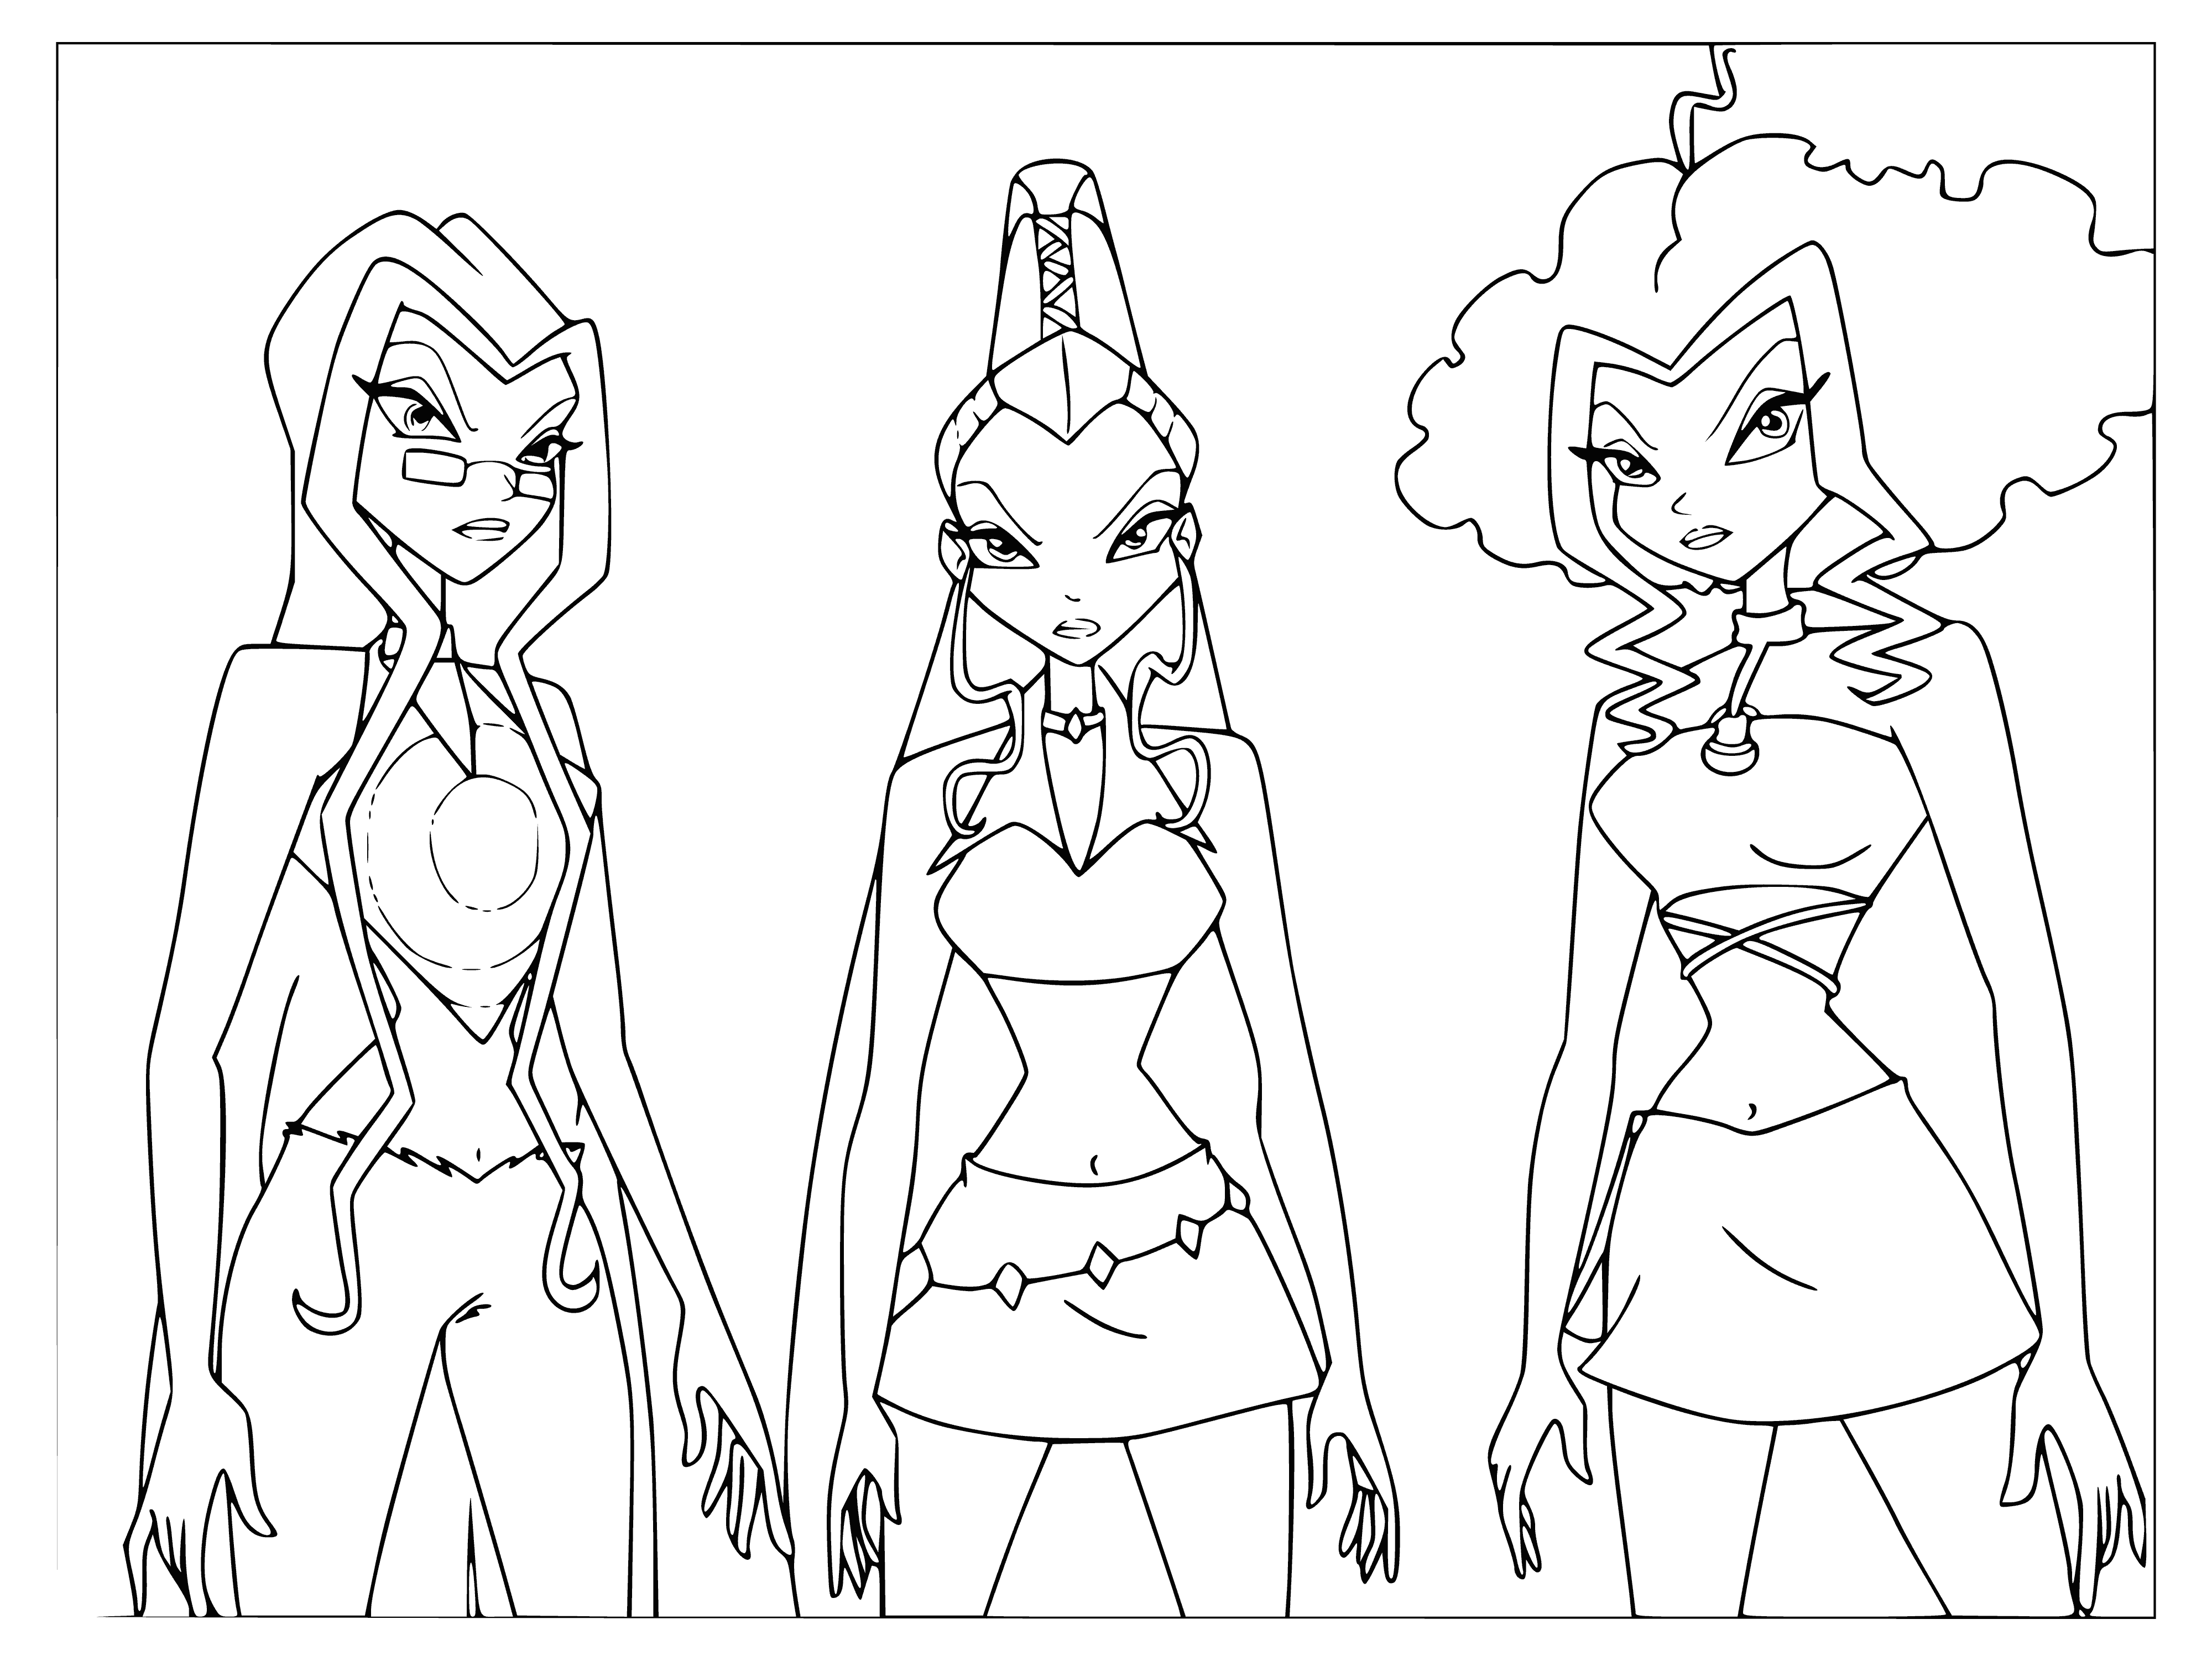 coloring page: Three mischievous sisters: Darcy, Icy, & Stormy play tricks & have fun! Cool, confident Icy always talks her way out of trouble.